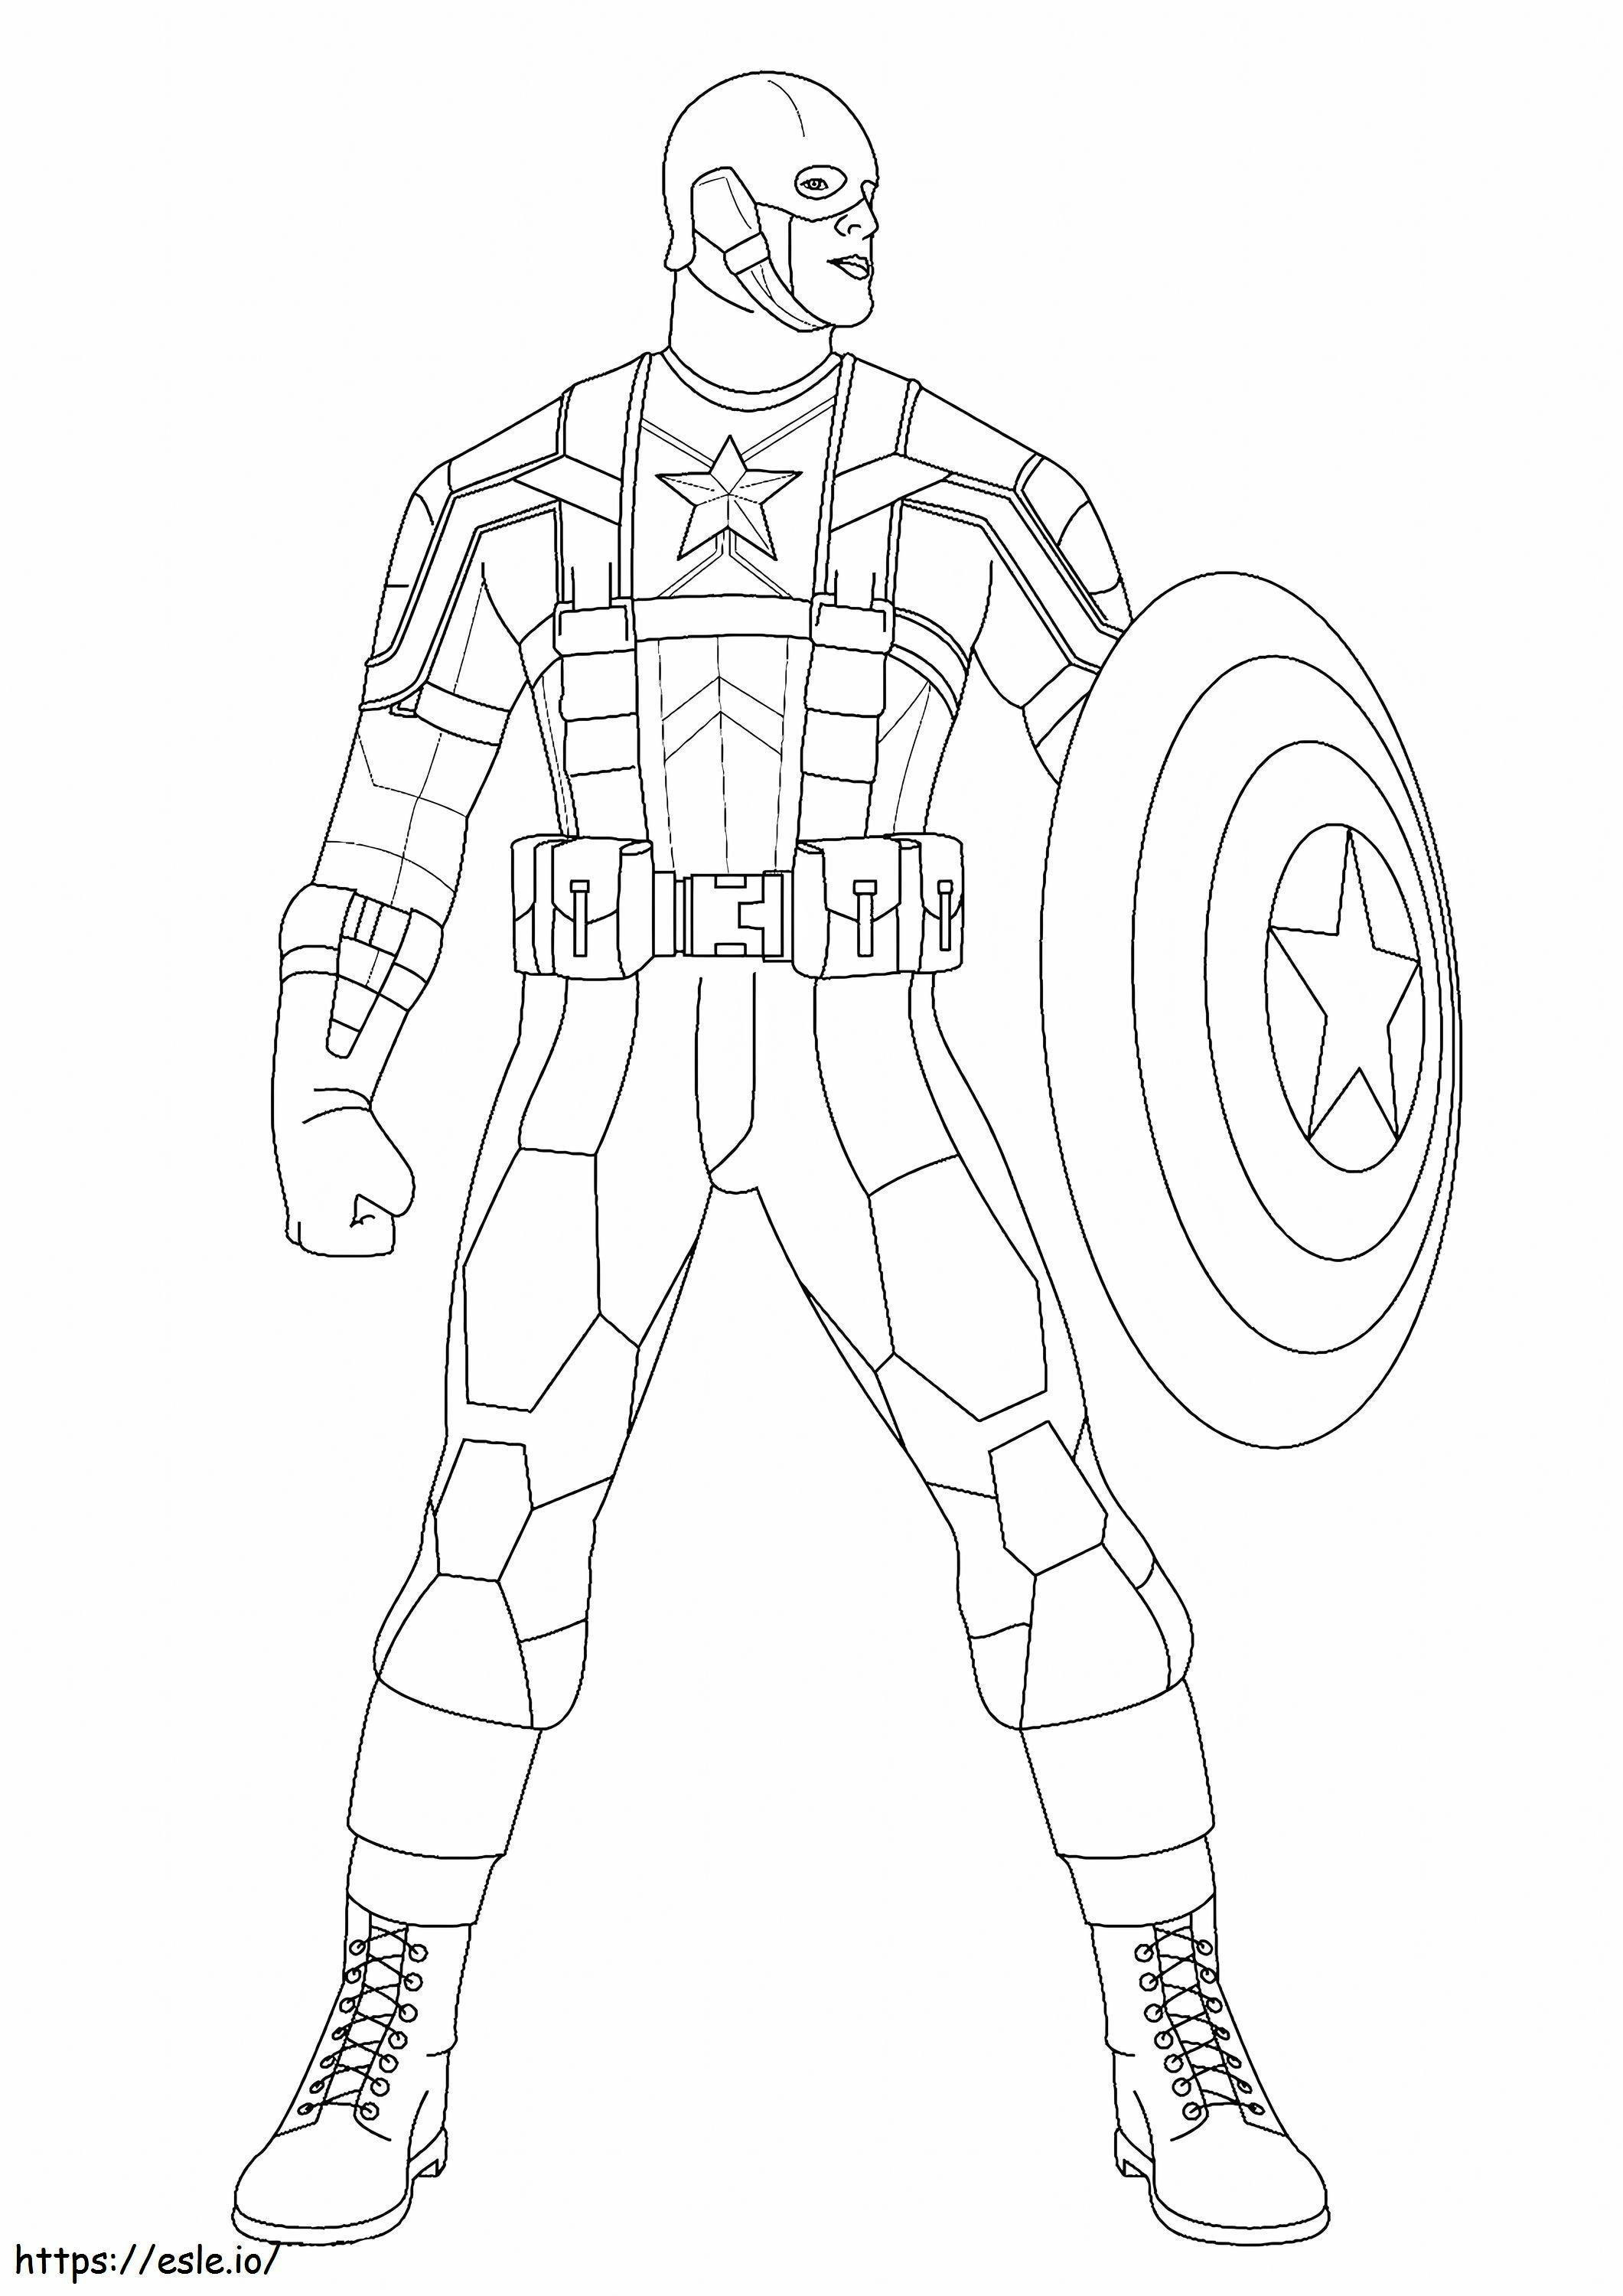 Basic Captain America coloring page